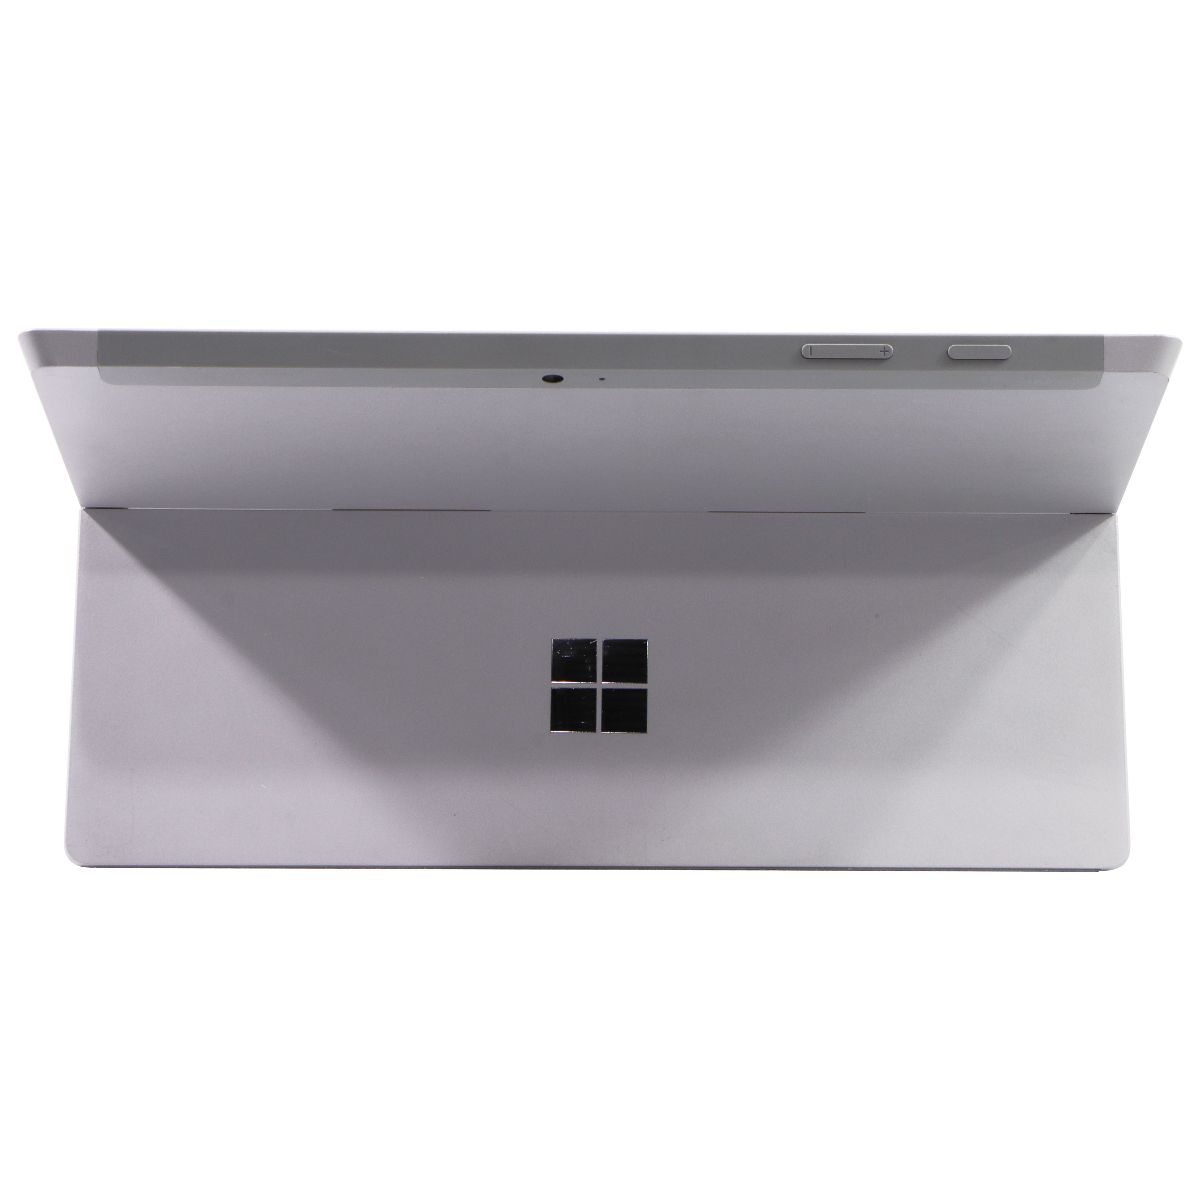 Microsoft Surface 3 (10.8-in) 1657 (Wifi + LTE) Intel x7-Z8700/128GB/4GB/10 Pro iPads, Tablets & eBook Readers Microsoft    - Simple Cell Bulk Wholesale Pricing - USA Seller